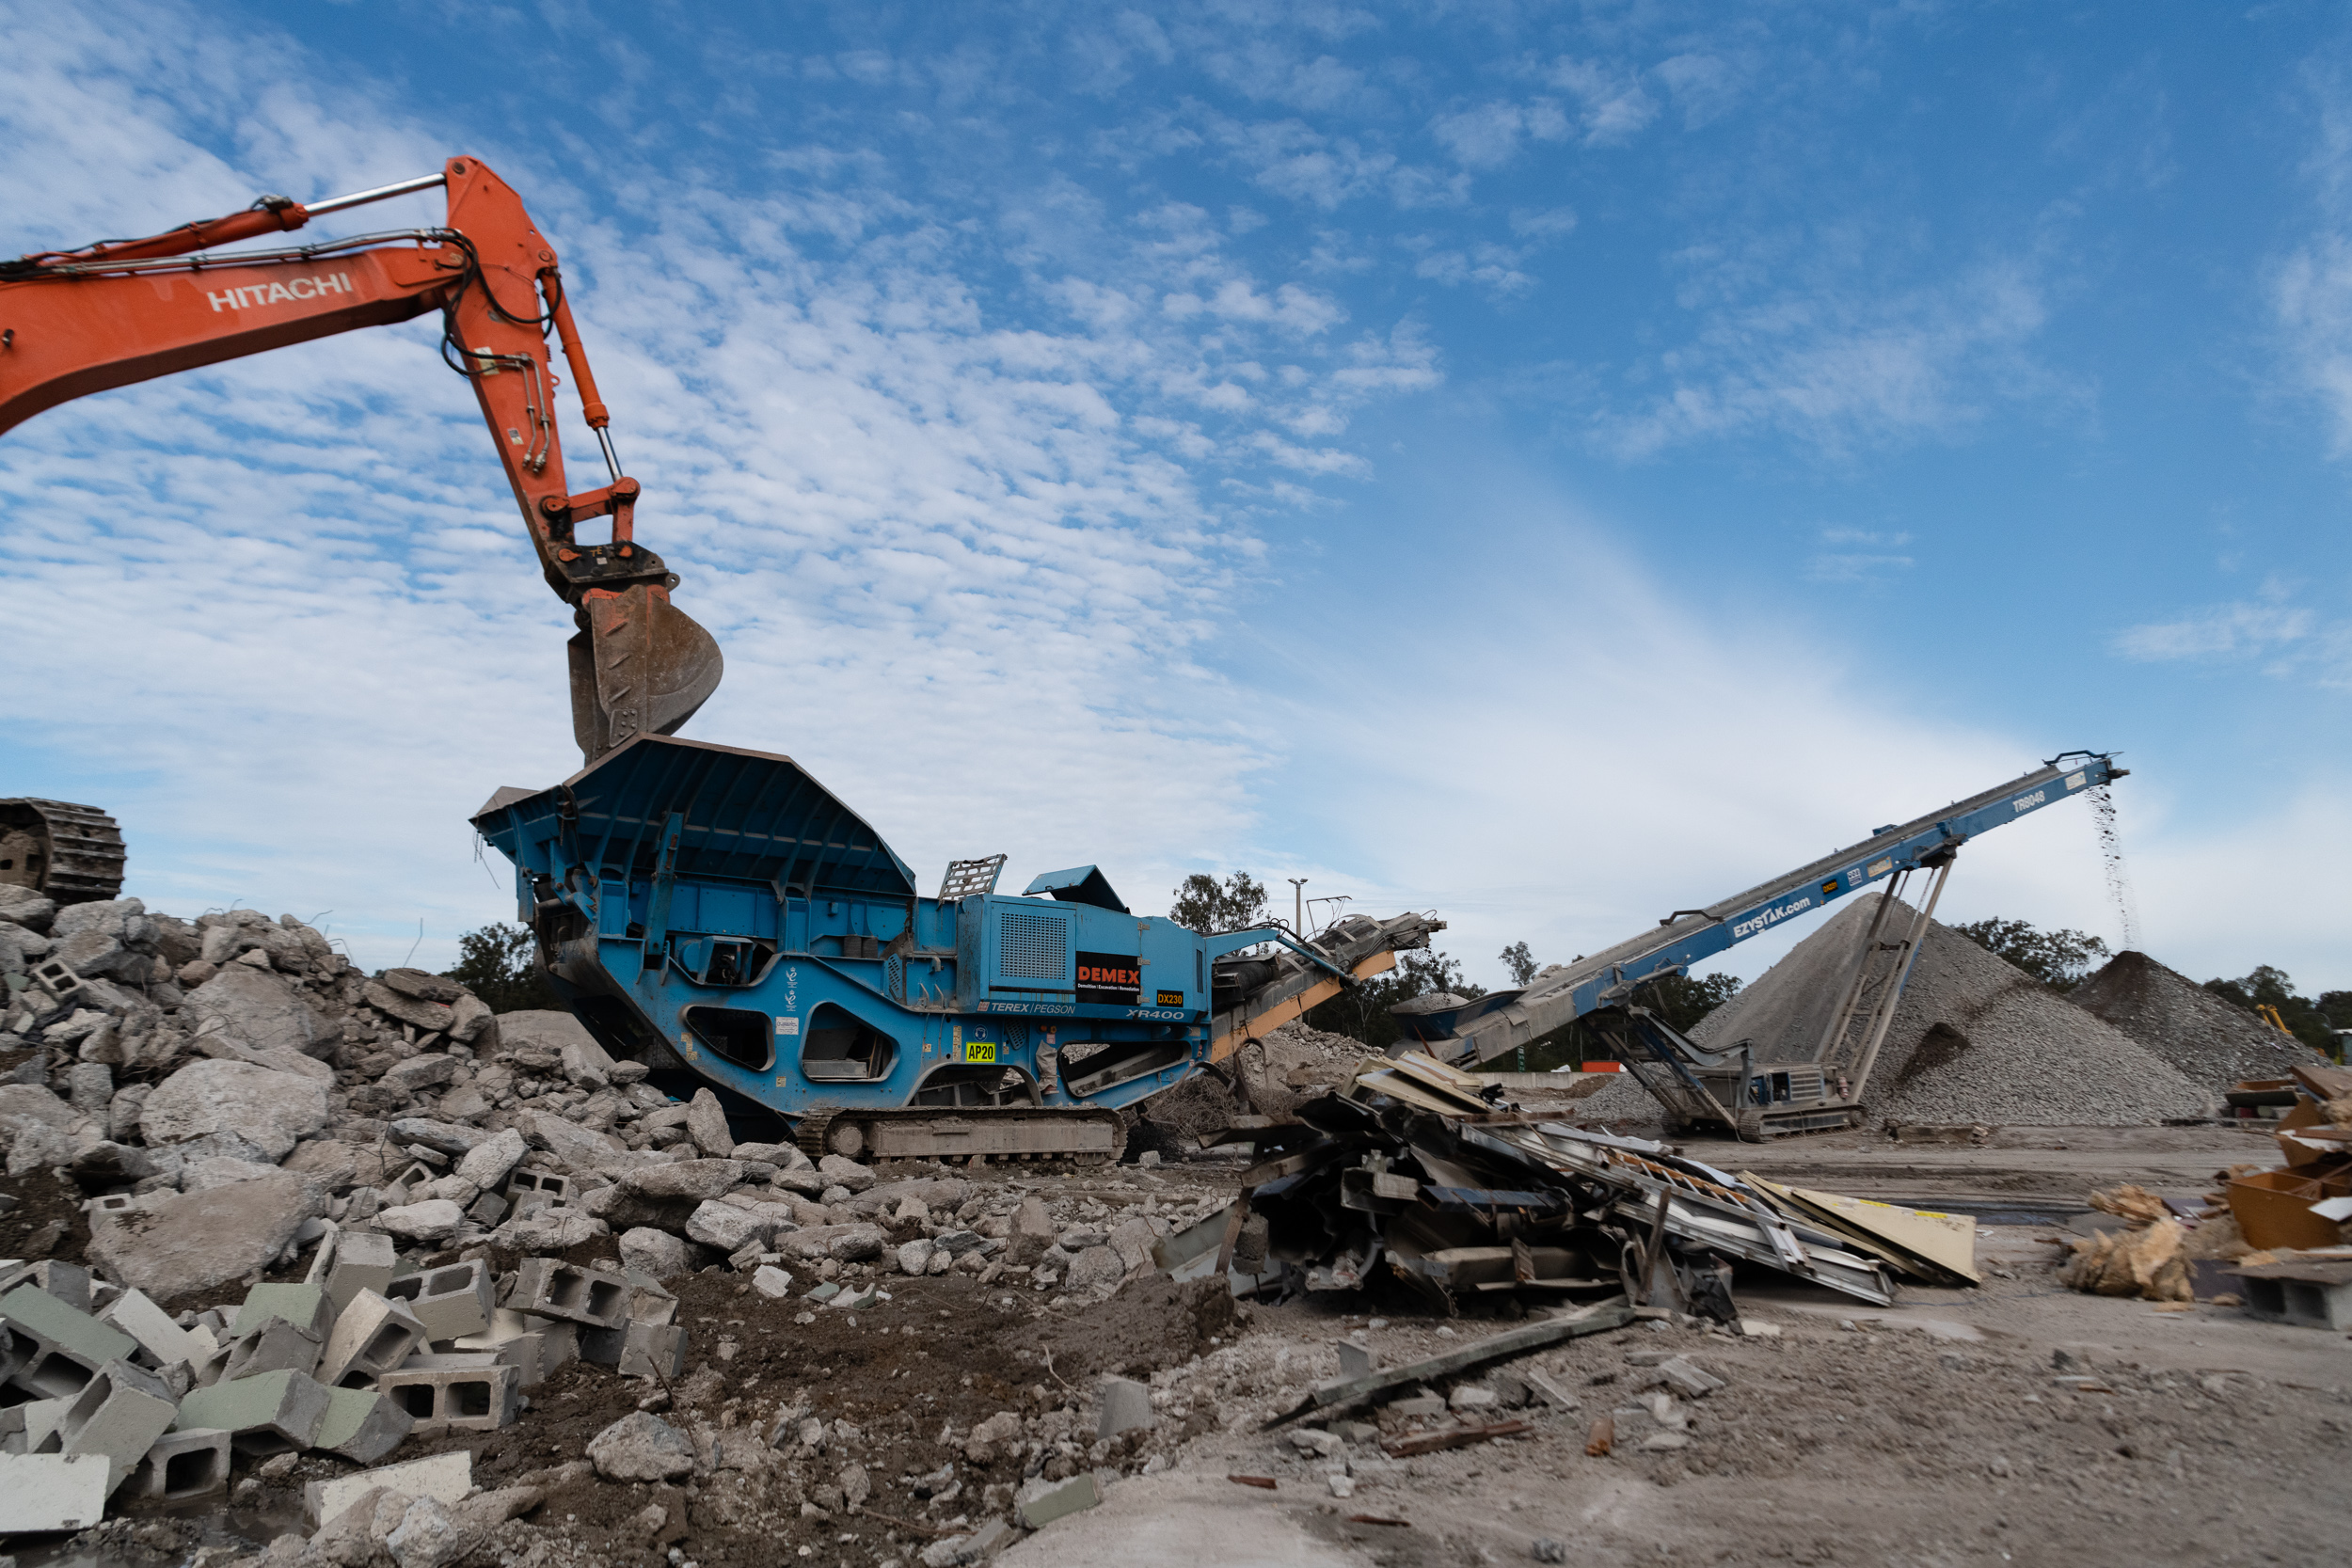 Do we need a new way of looking at construction and demolition waste?